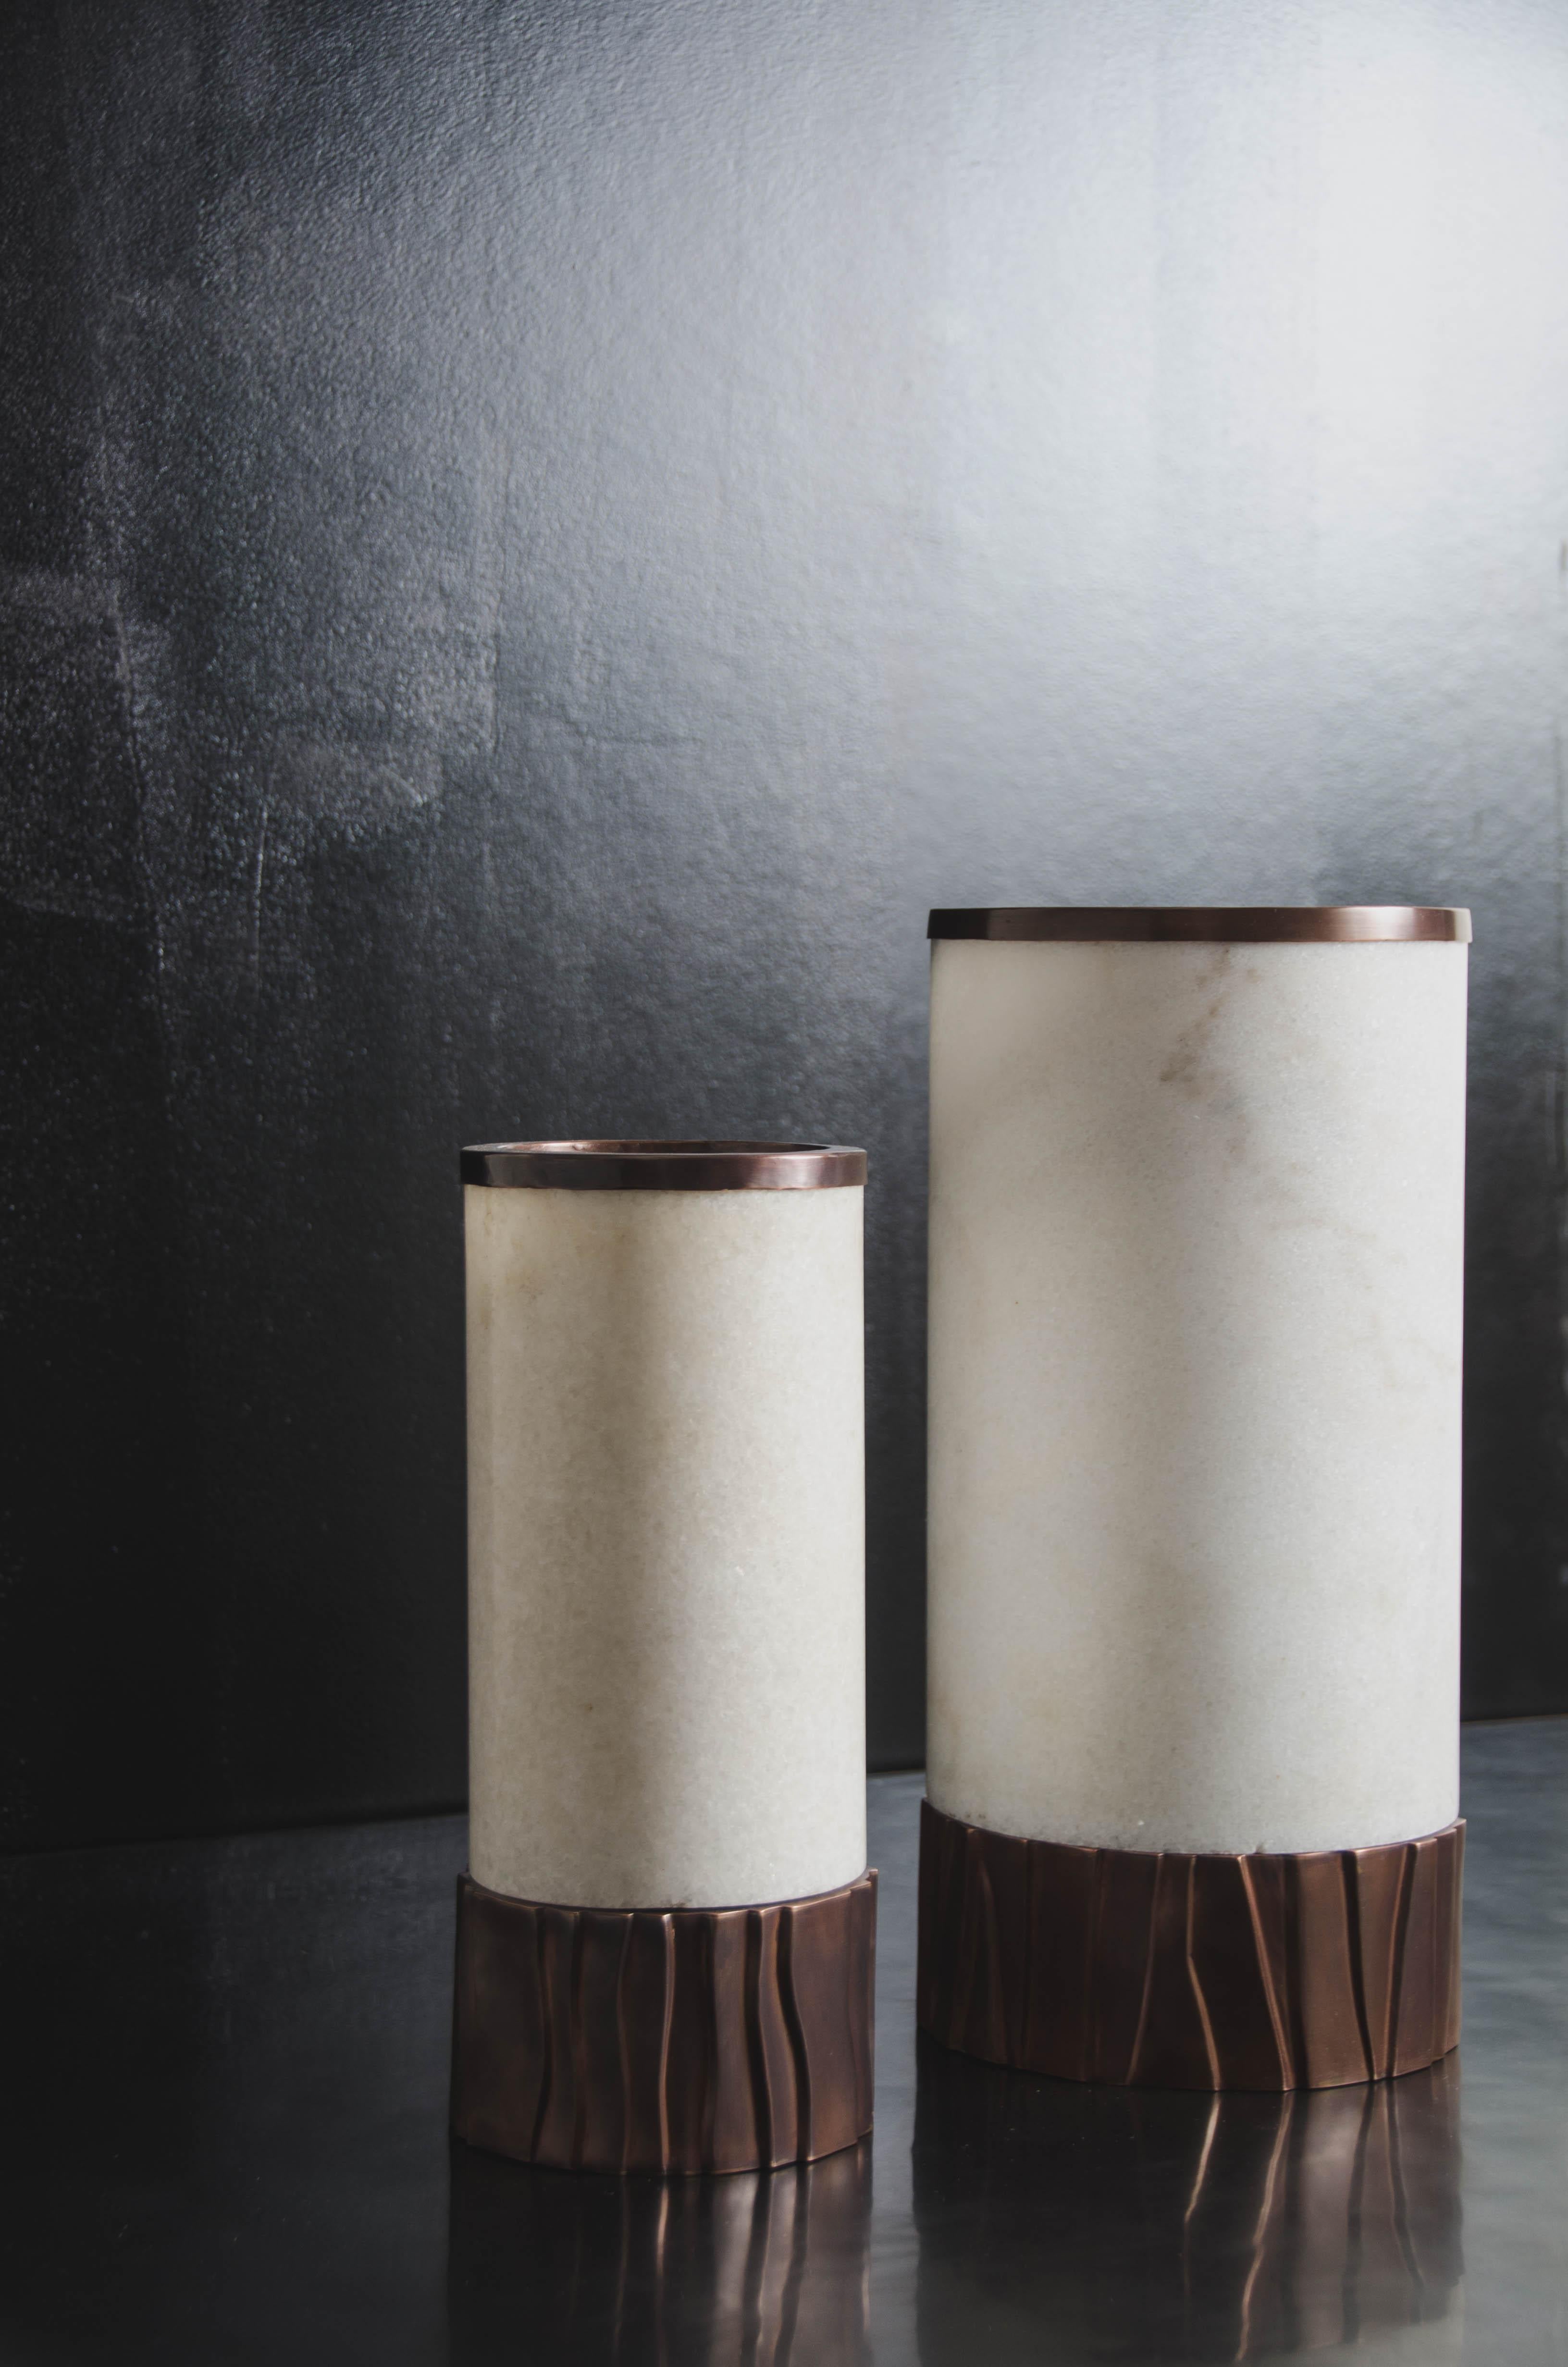 Cylindrical Alabaster copper trim lamp w/ Kuai base
Alabaster
Copper
Hand Repoussé
Limited Edition
Each piece is individually crafted and is unique

Repoussé is the traditional art of hand-hammering decorative relief onto sheet metal. The